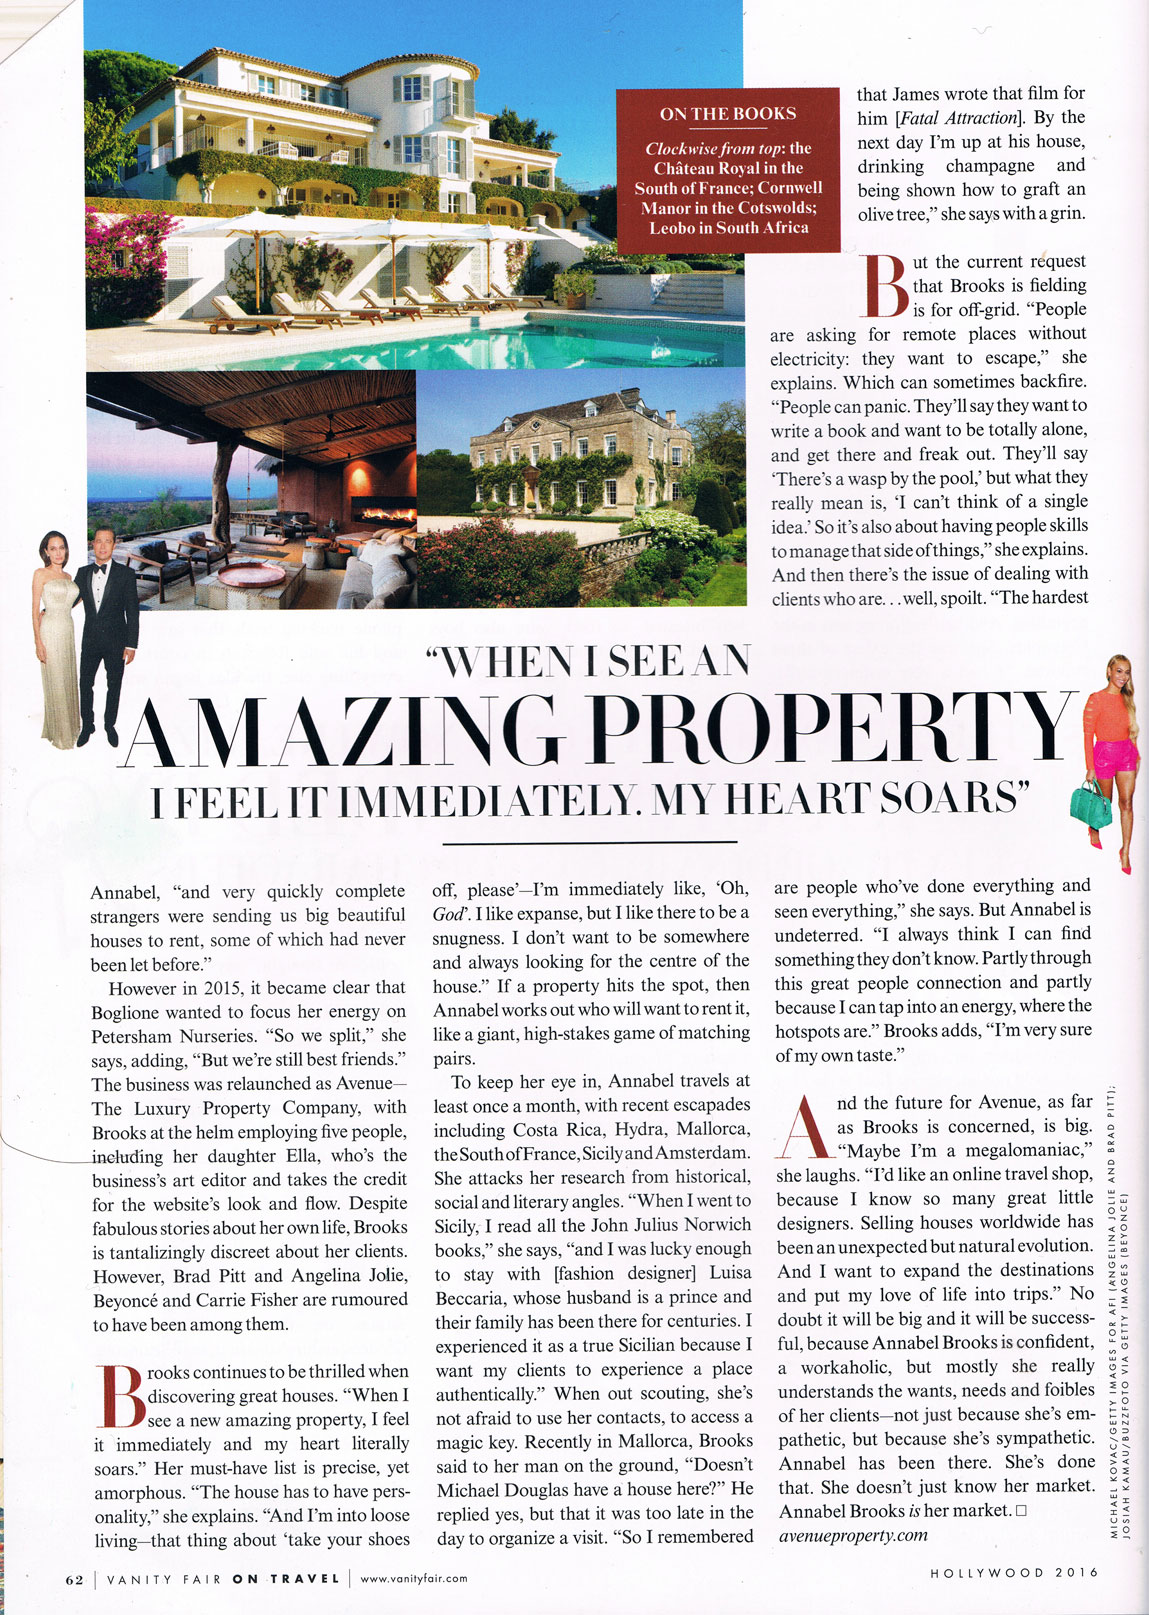 Villa that is part of the Avenue property collection with Annabel Brooks interview page 5